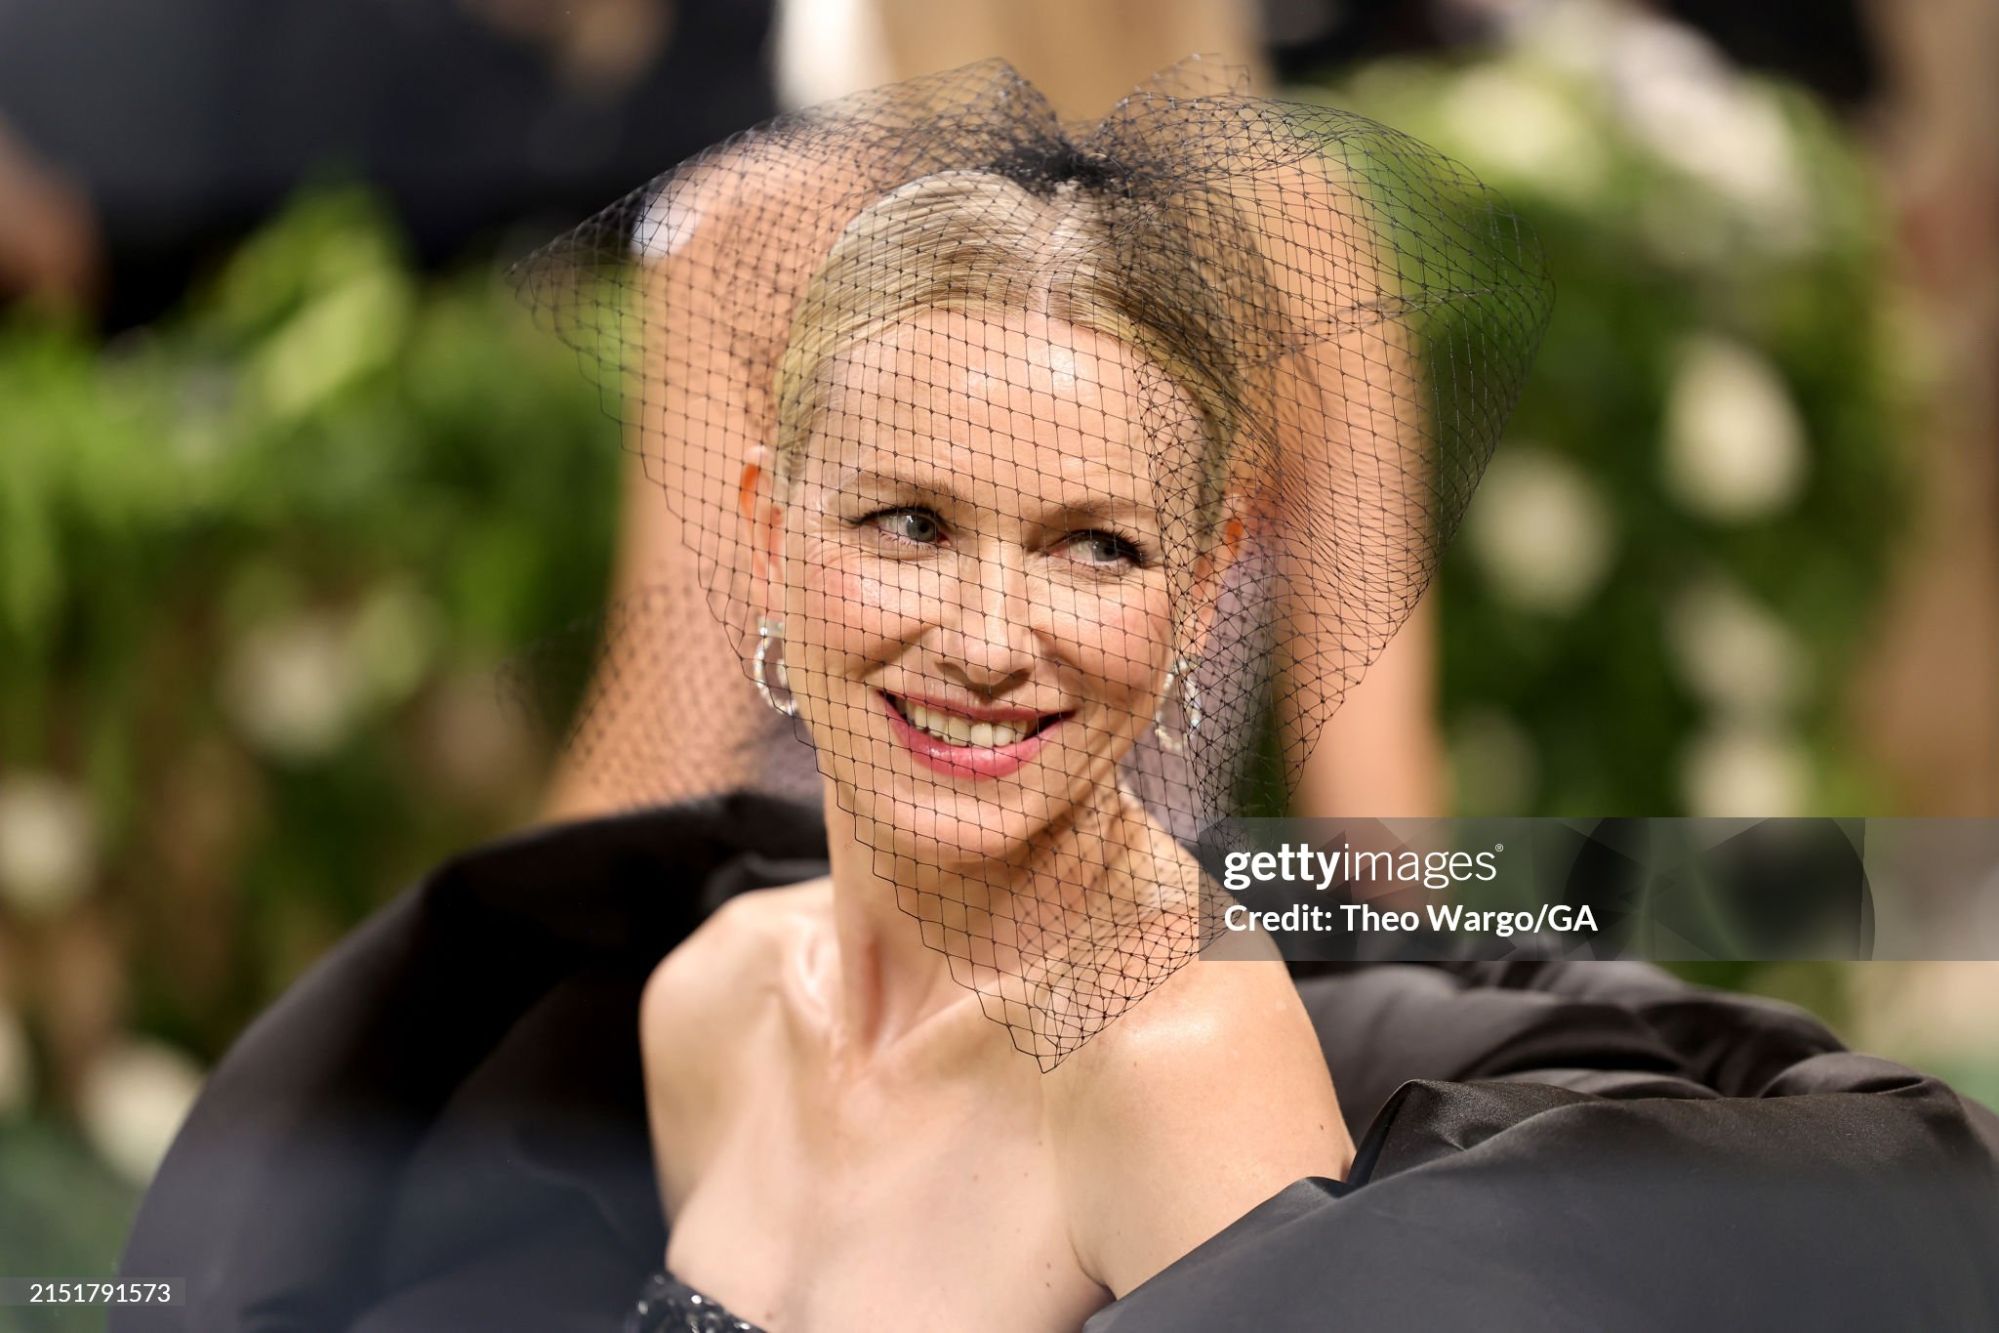 gettyimages-2151791573-2048x2048.jpg